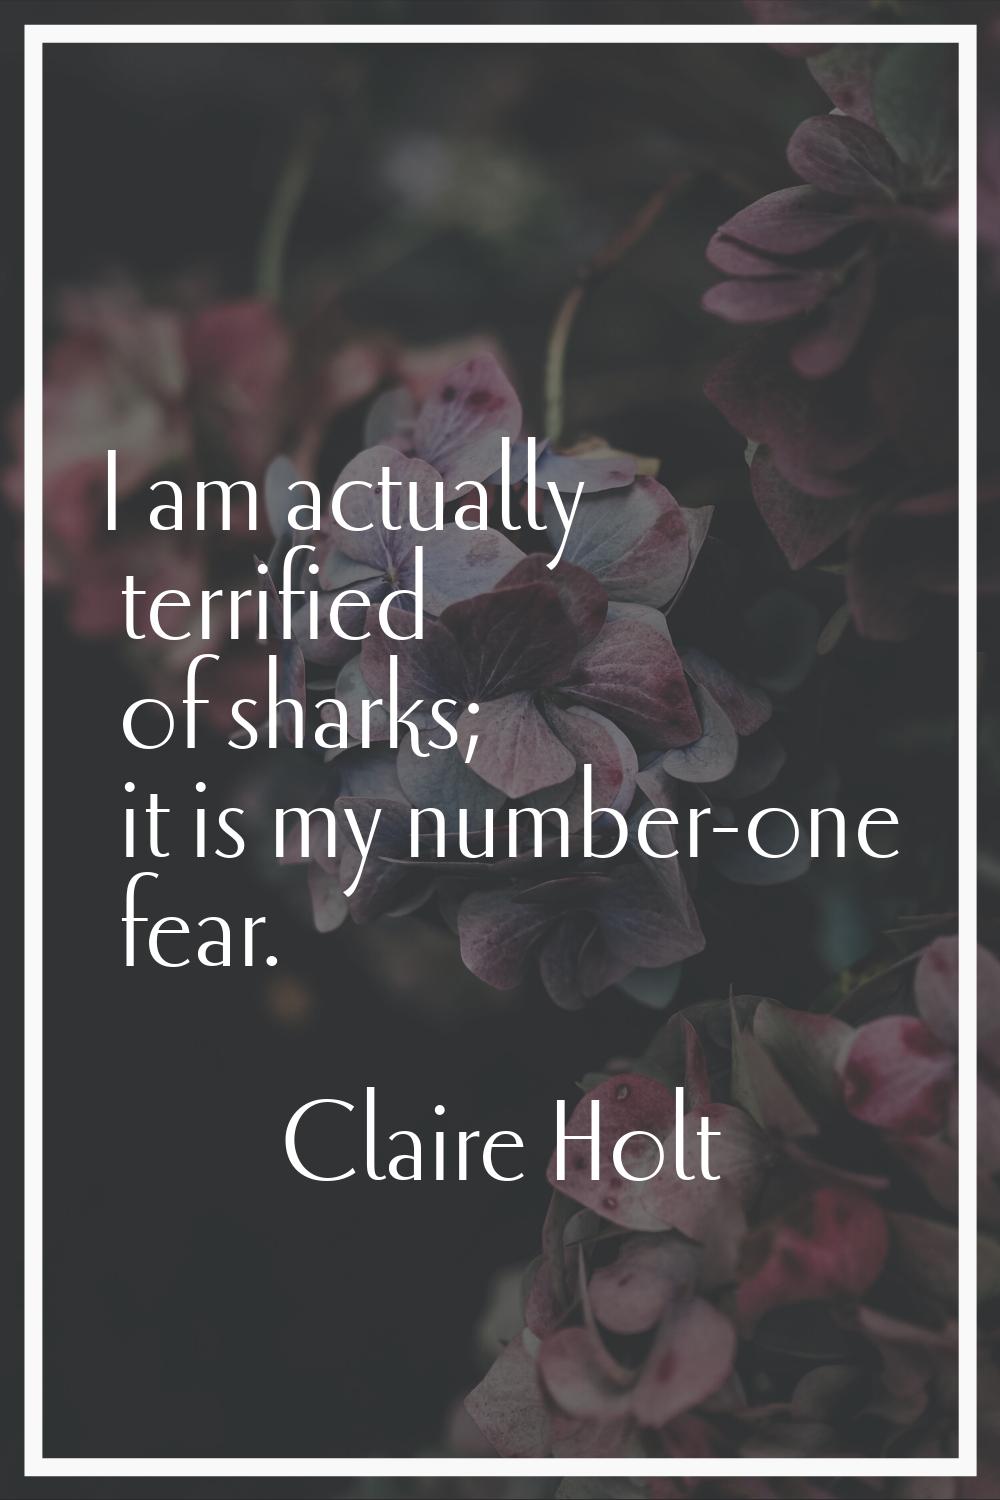 I am actually terrified of sharks; it is my number-one fear.